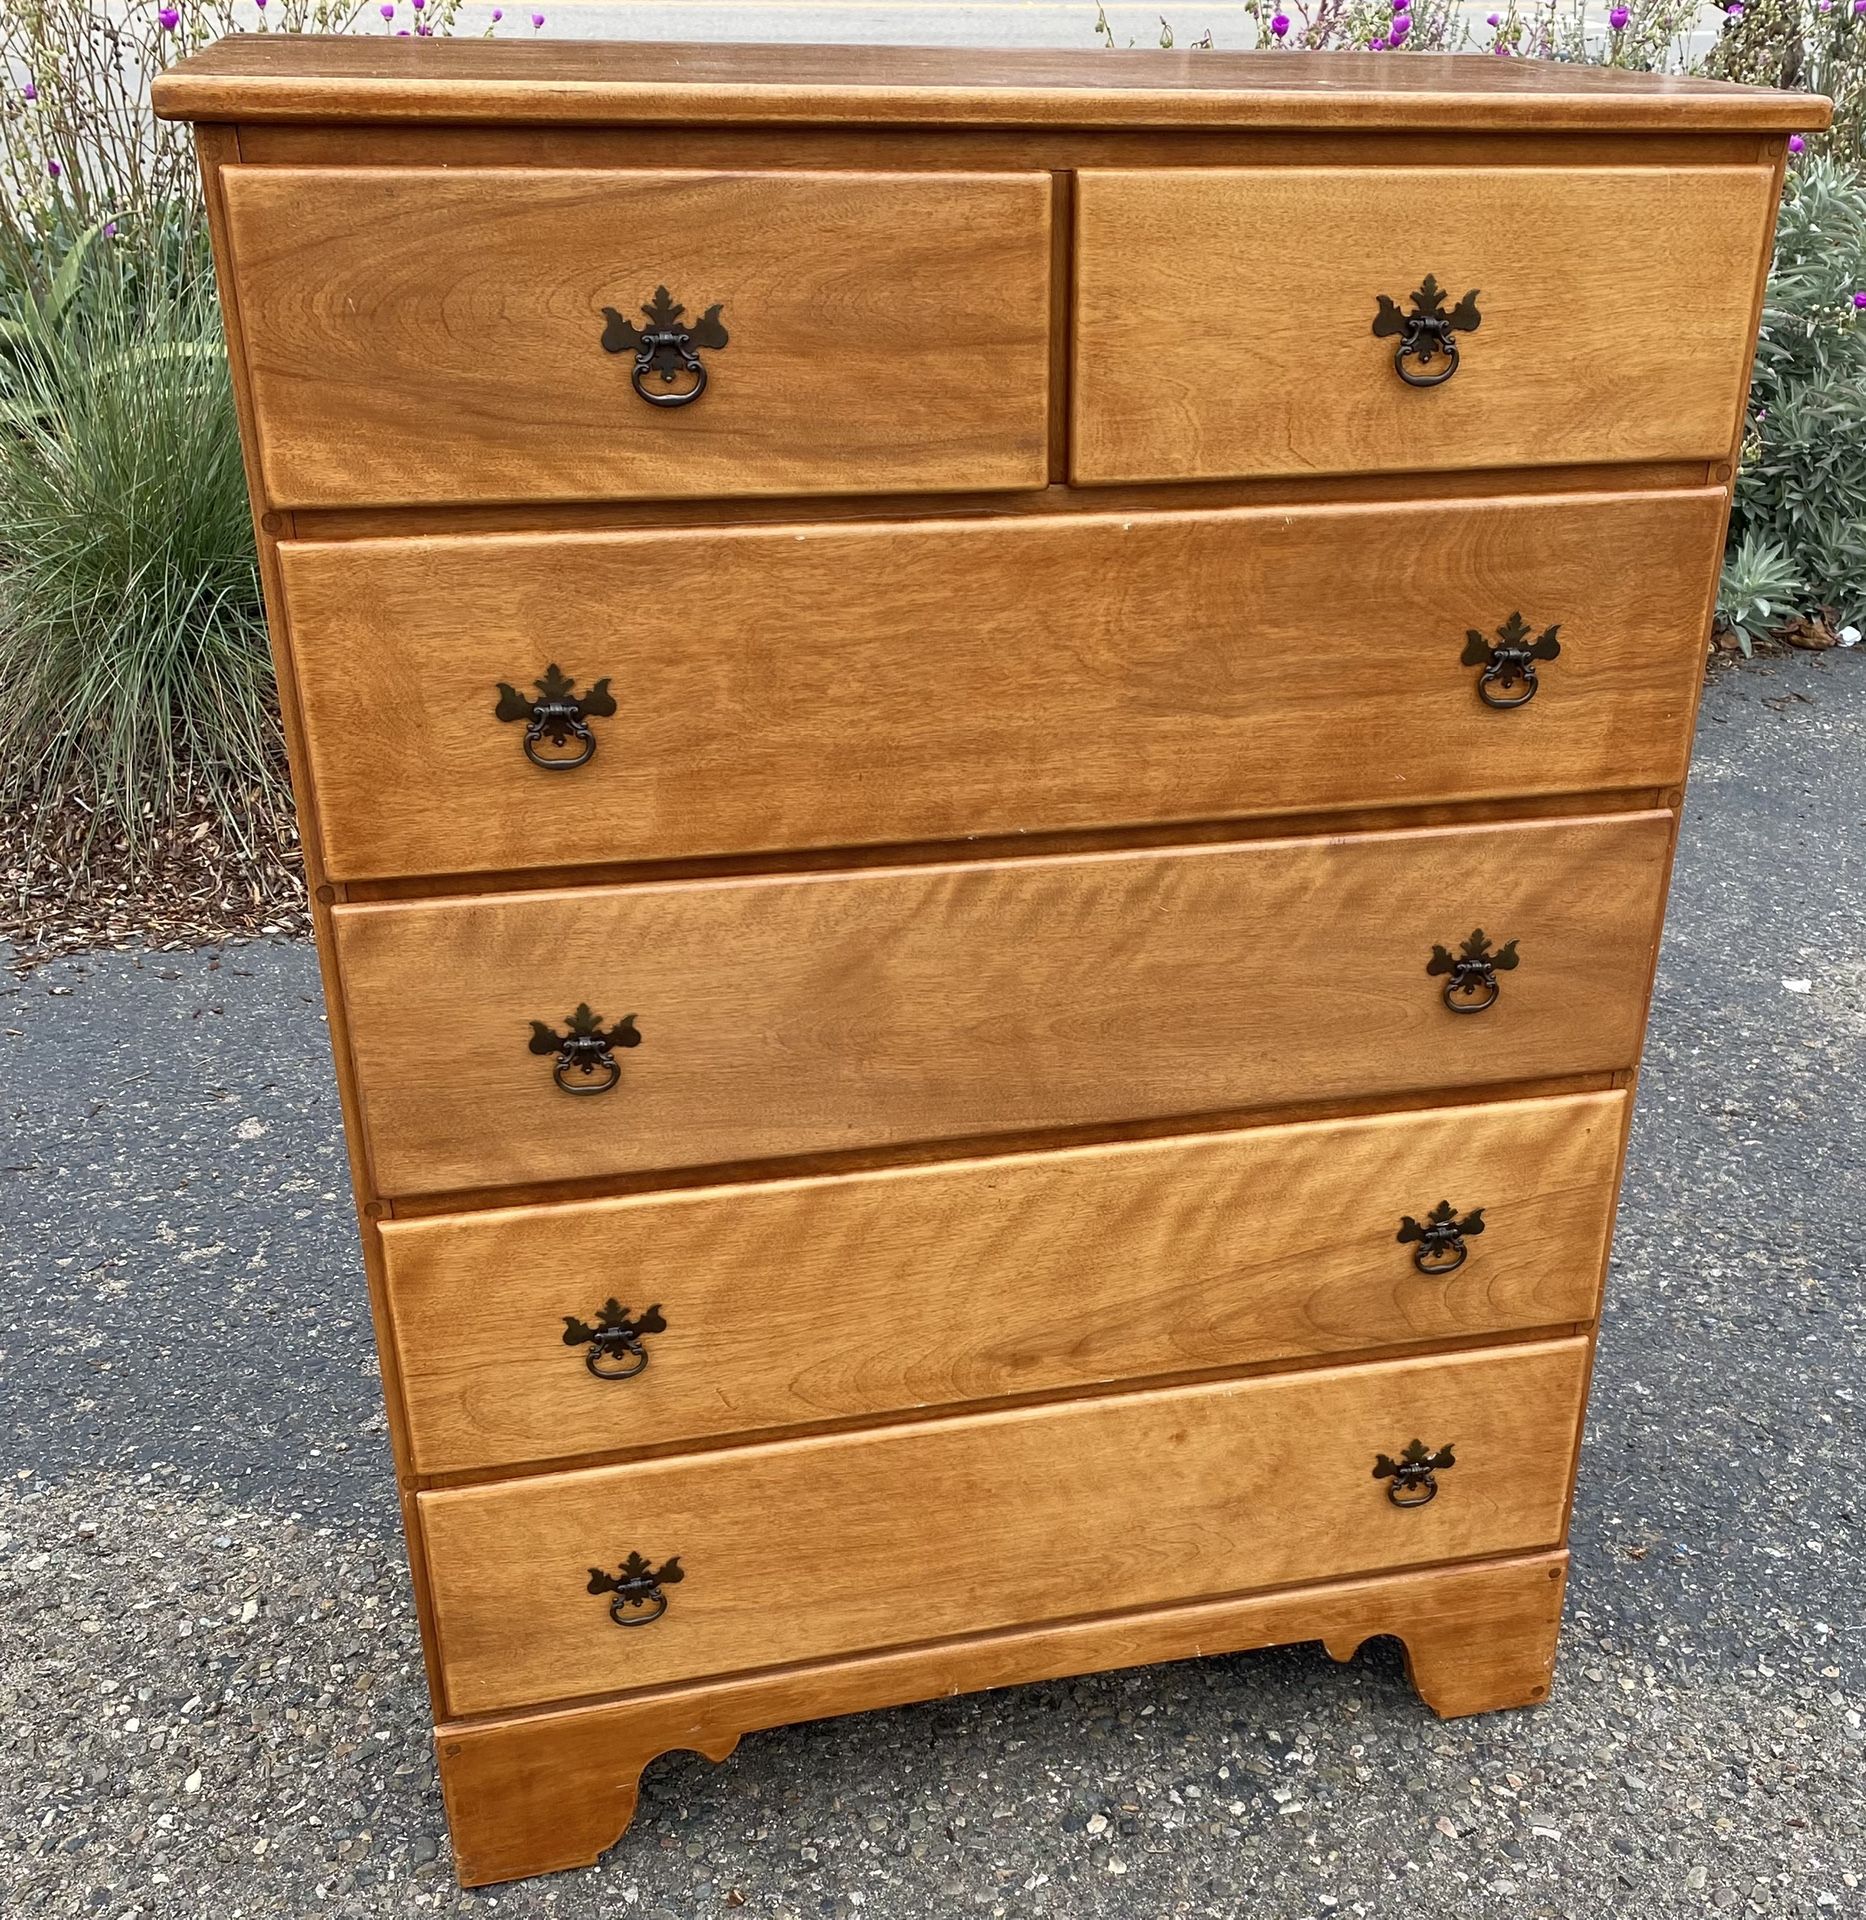 Dresser solid maple 6 drawers  This dresser was made by Ethan Allen Drawers all slide great dovetail construction #71940 Absolutely beautiful. There i